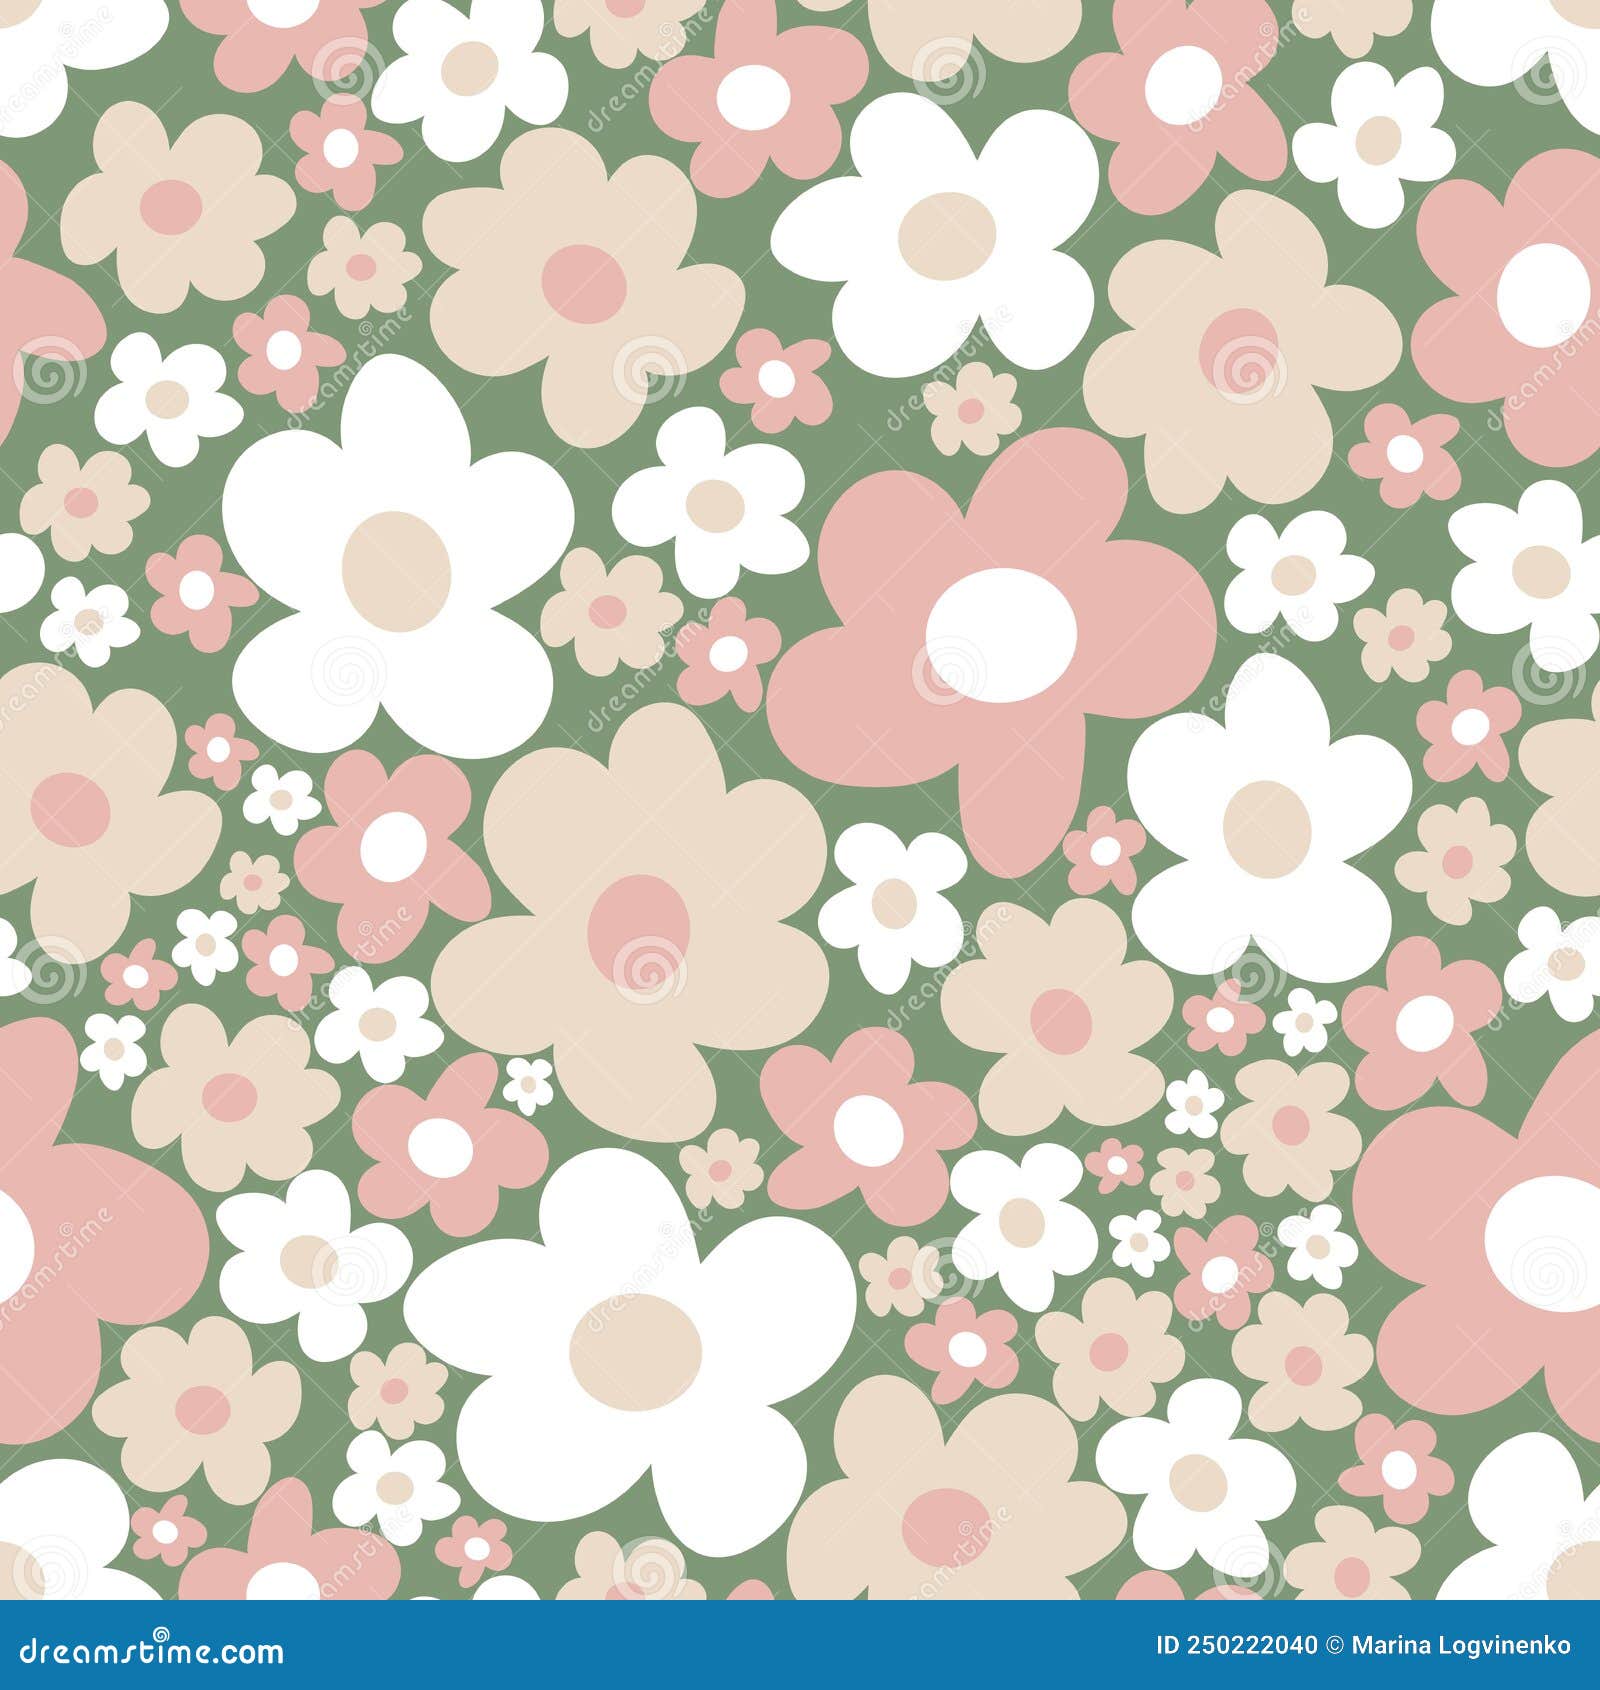 Cute floral pattern with wonderful white and pink flowers. Seamless vector texture on green. Elegant template for fashion prints, textiles, wallpaper and packaging